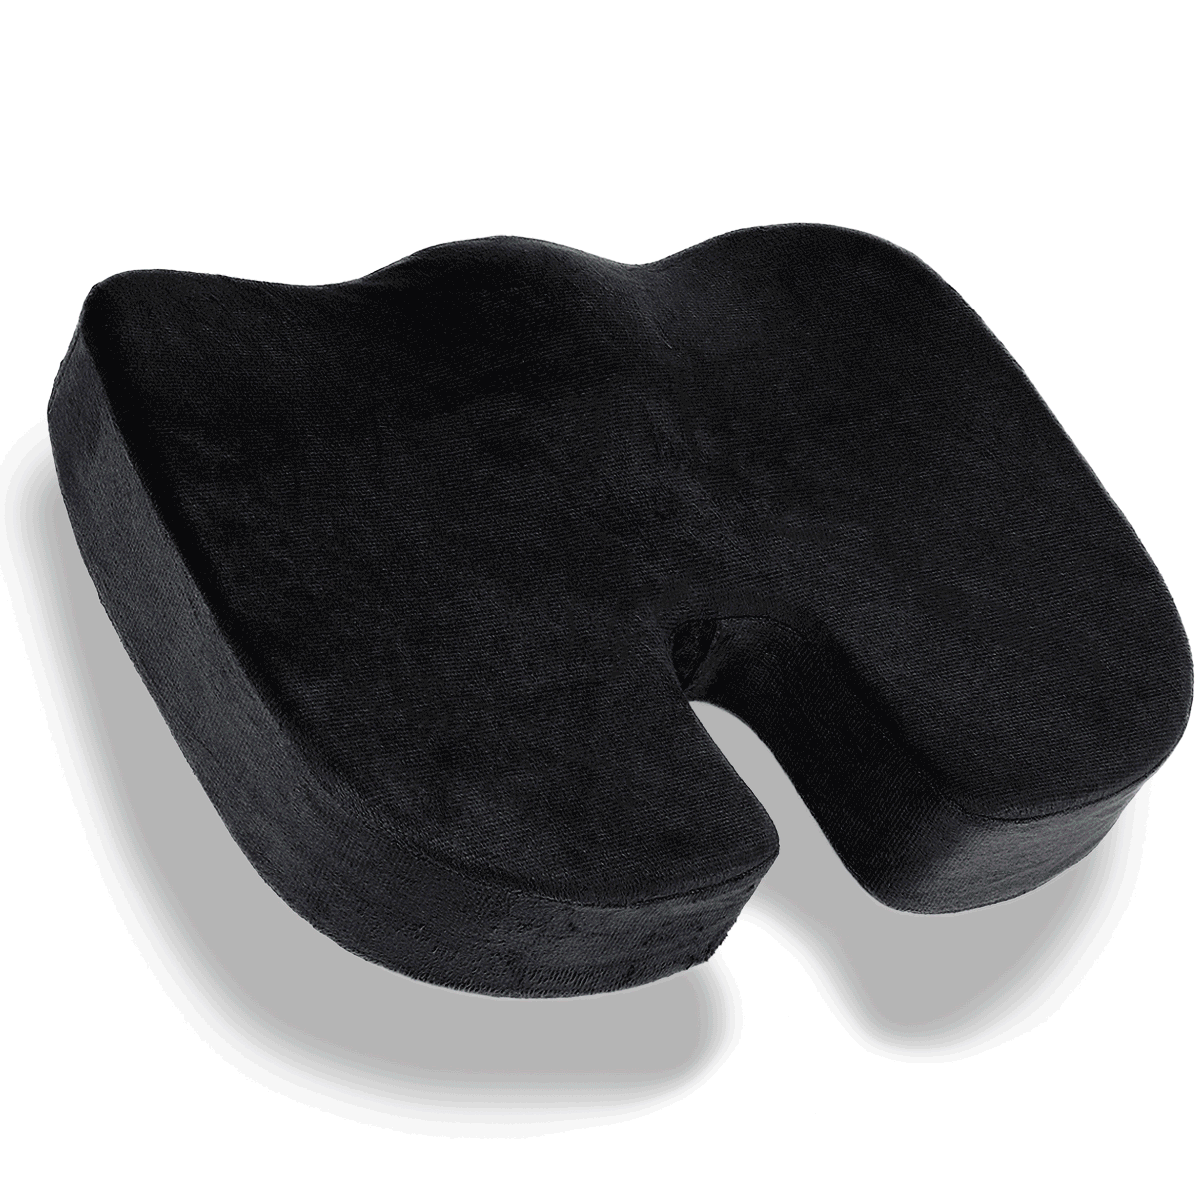 Memory Foam Office Chair Cushion for Butt and Back Support Sciatica & Tailbone Pain Relief-Wheelchair Seat Cushion for Seniors COMHOMA Seat Cushion for Office Chair Car Seat Cushion 